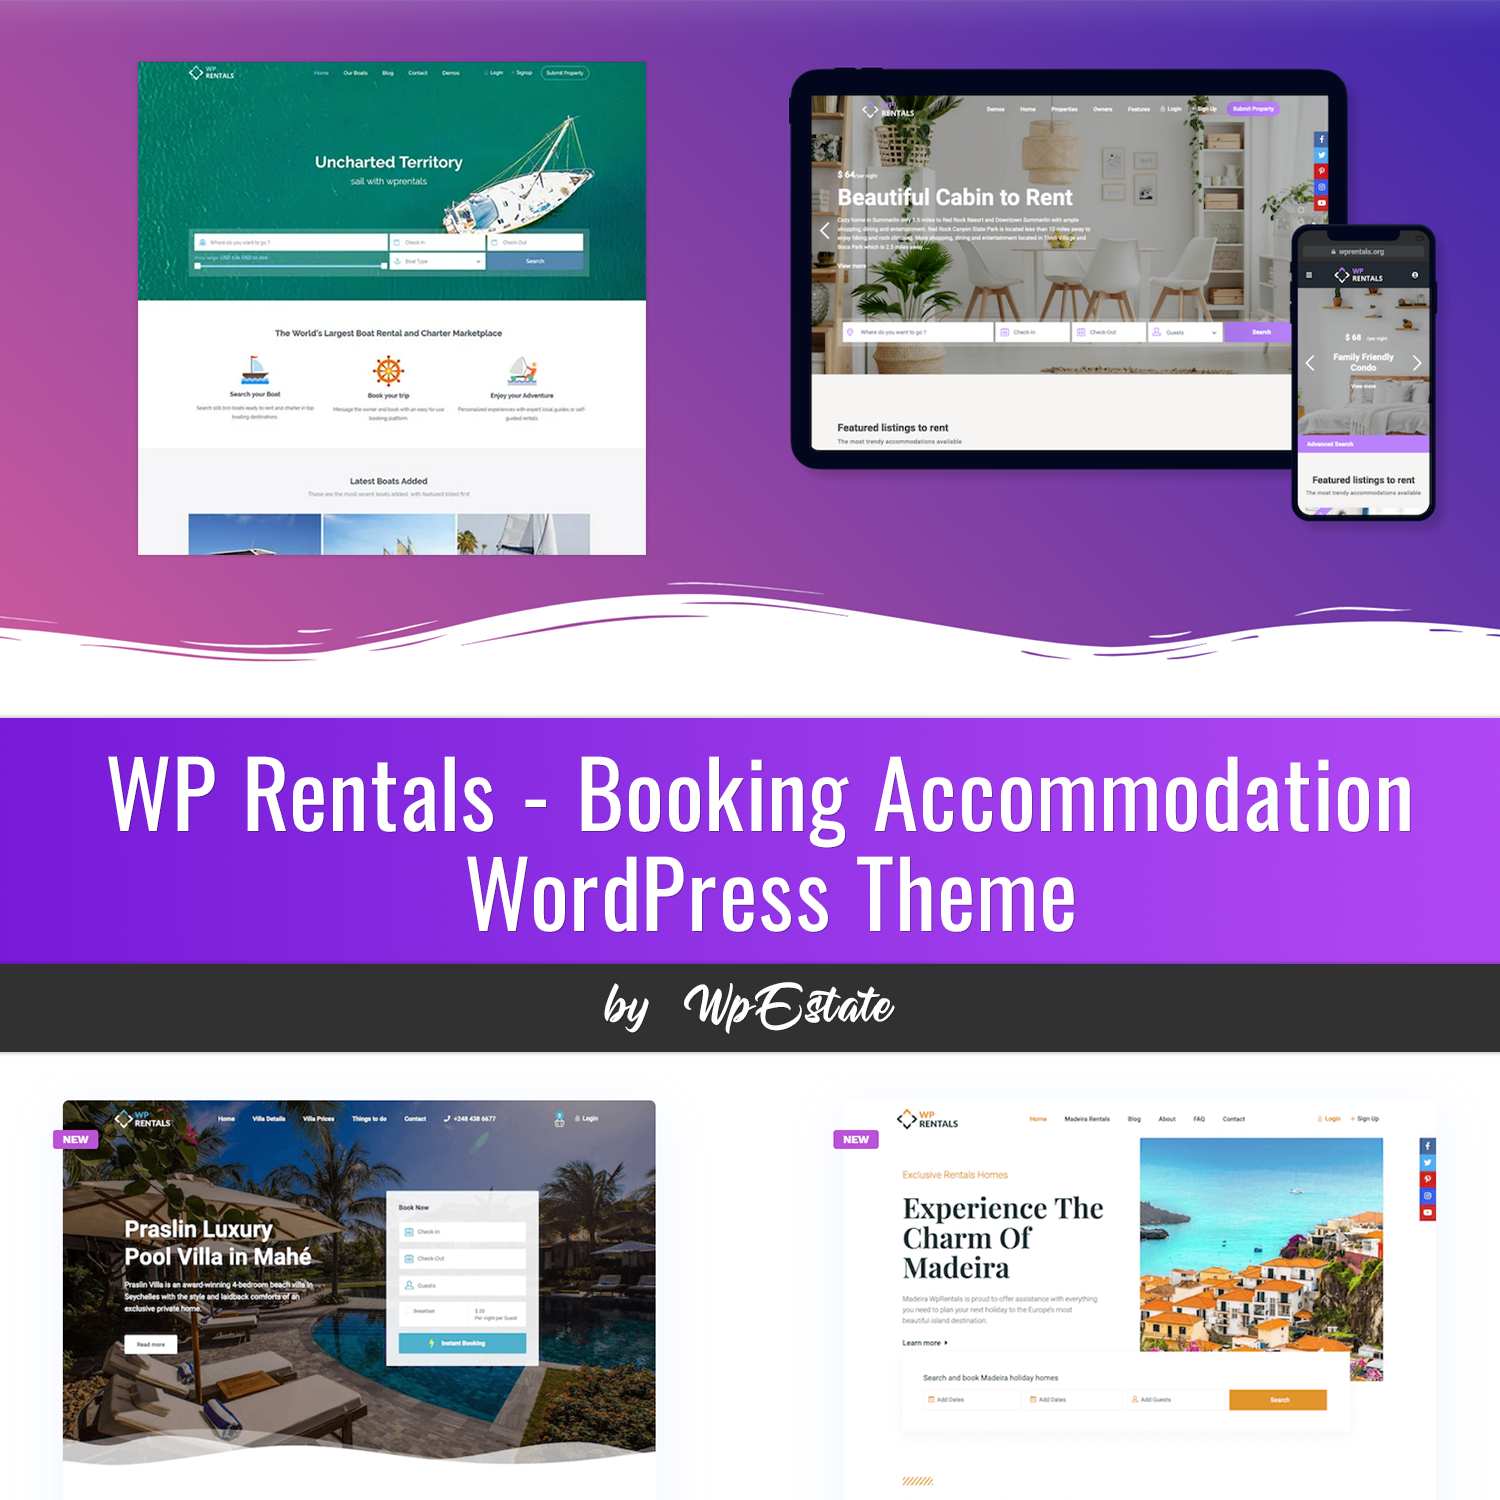 Preview rentals booking accommodation wordpress theme.